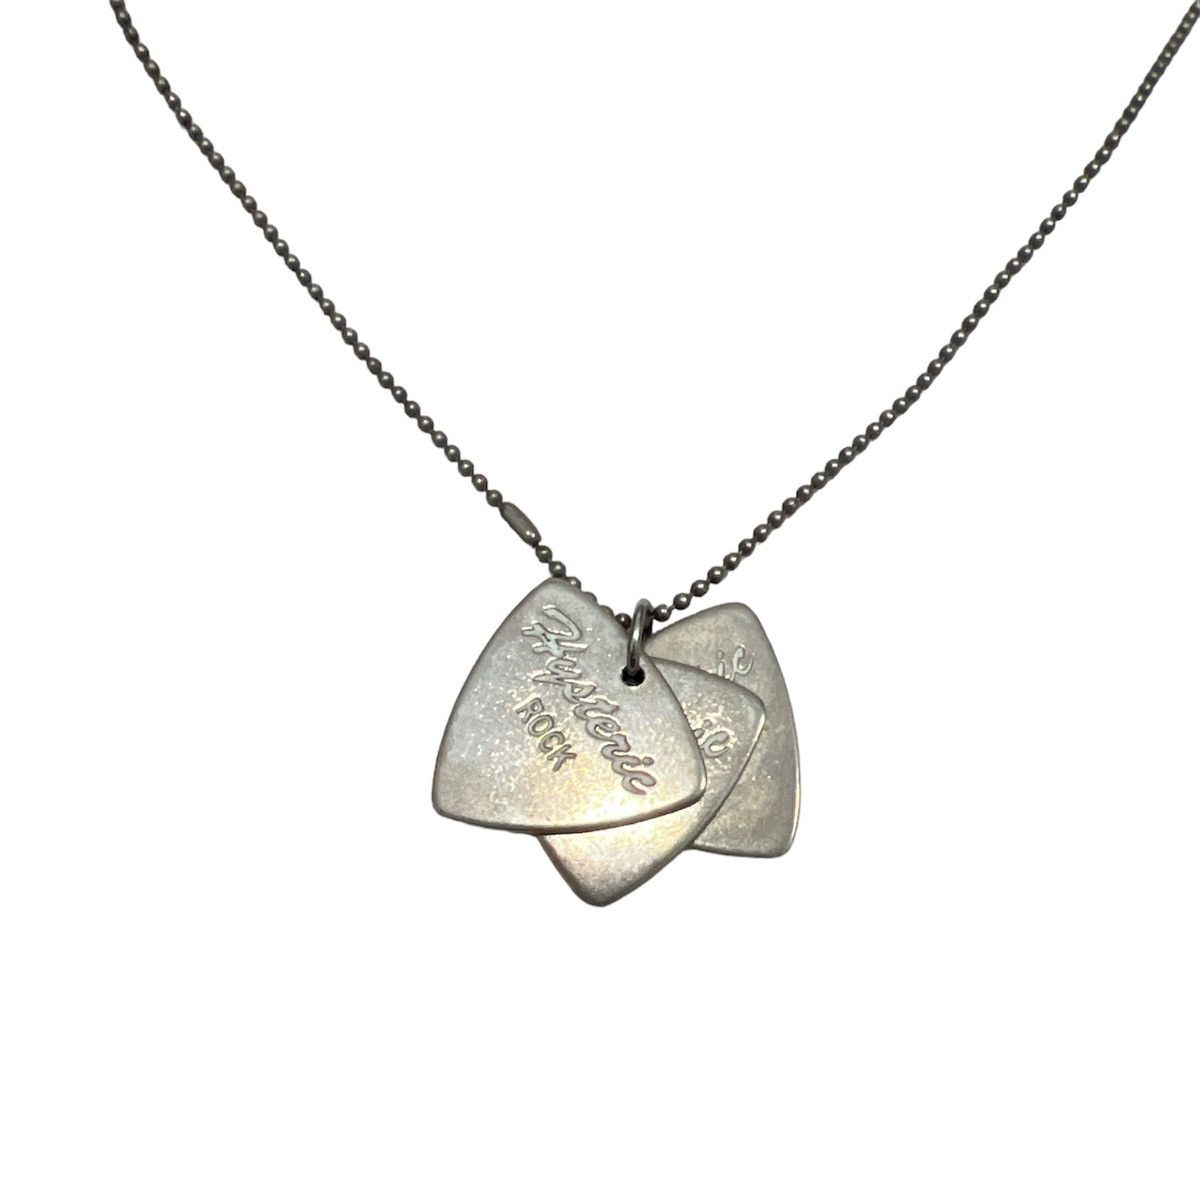 Hysteric Glamour silver guitar pick necklace - 3